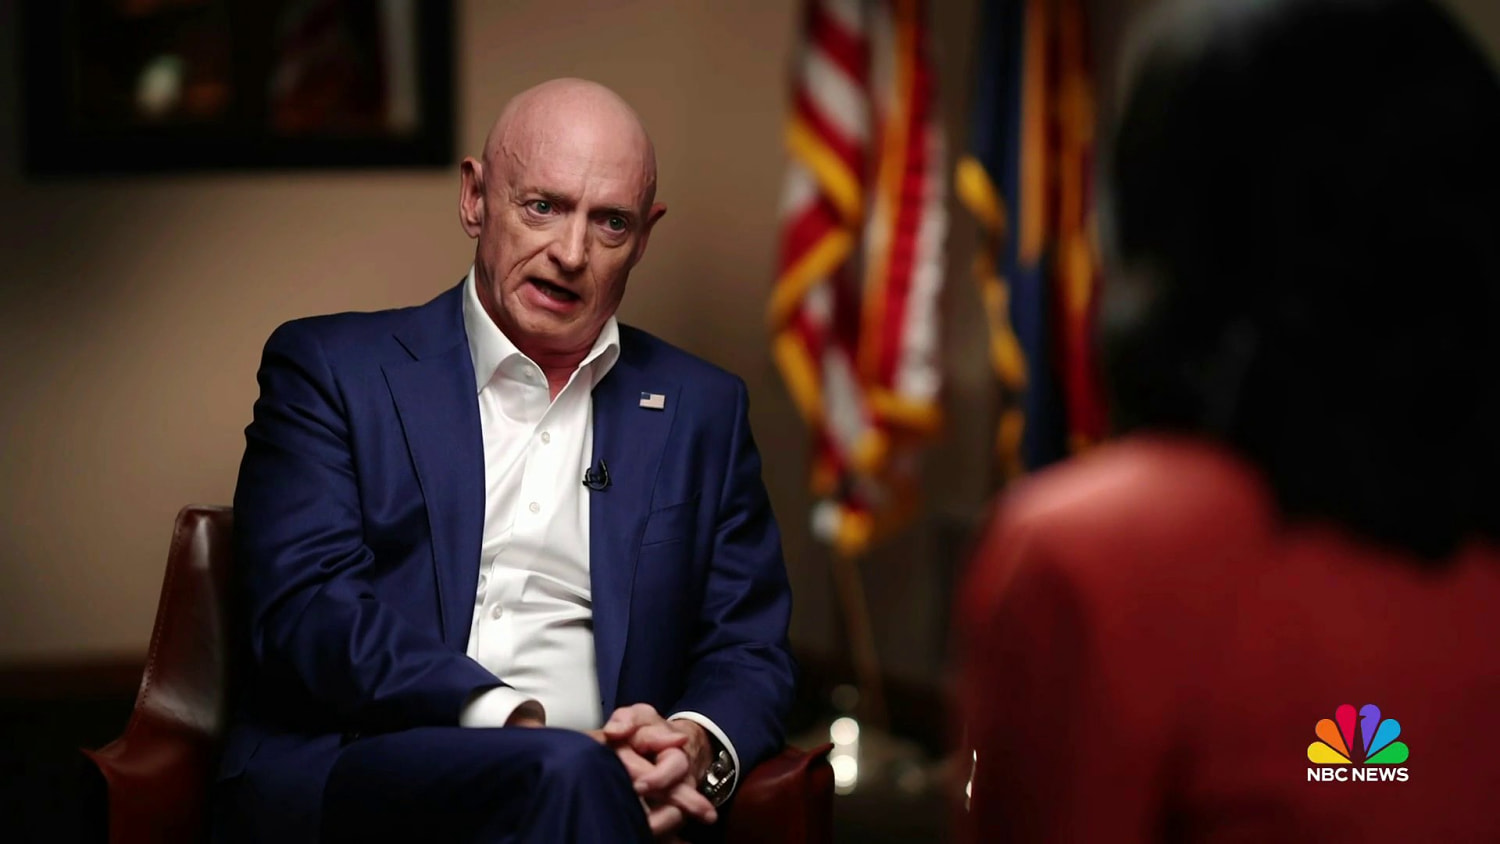 Arizona Sen. Kelly says he supports getting rid of filibuster to codify abortion rights